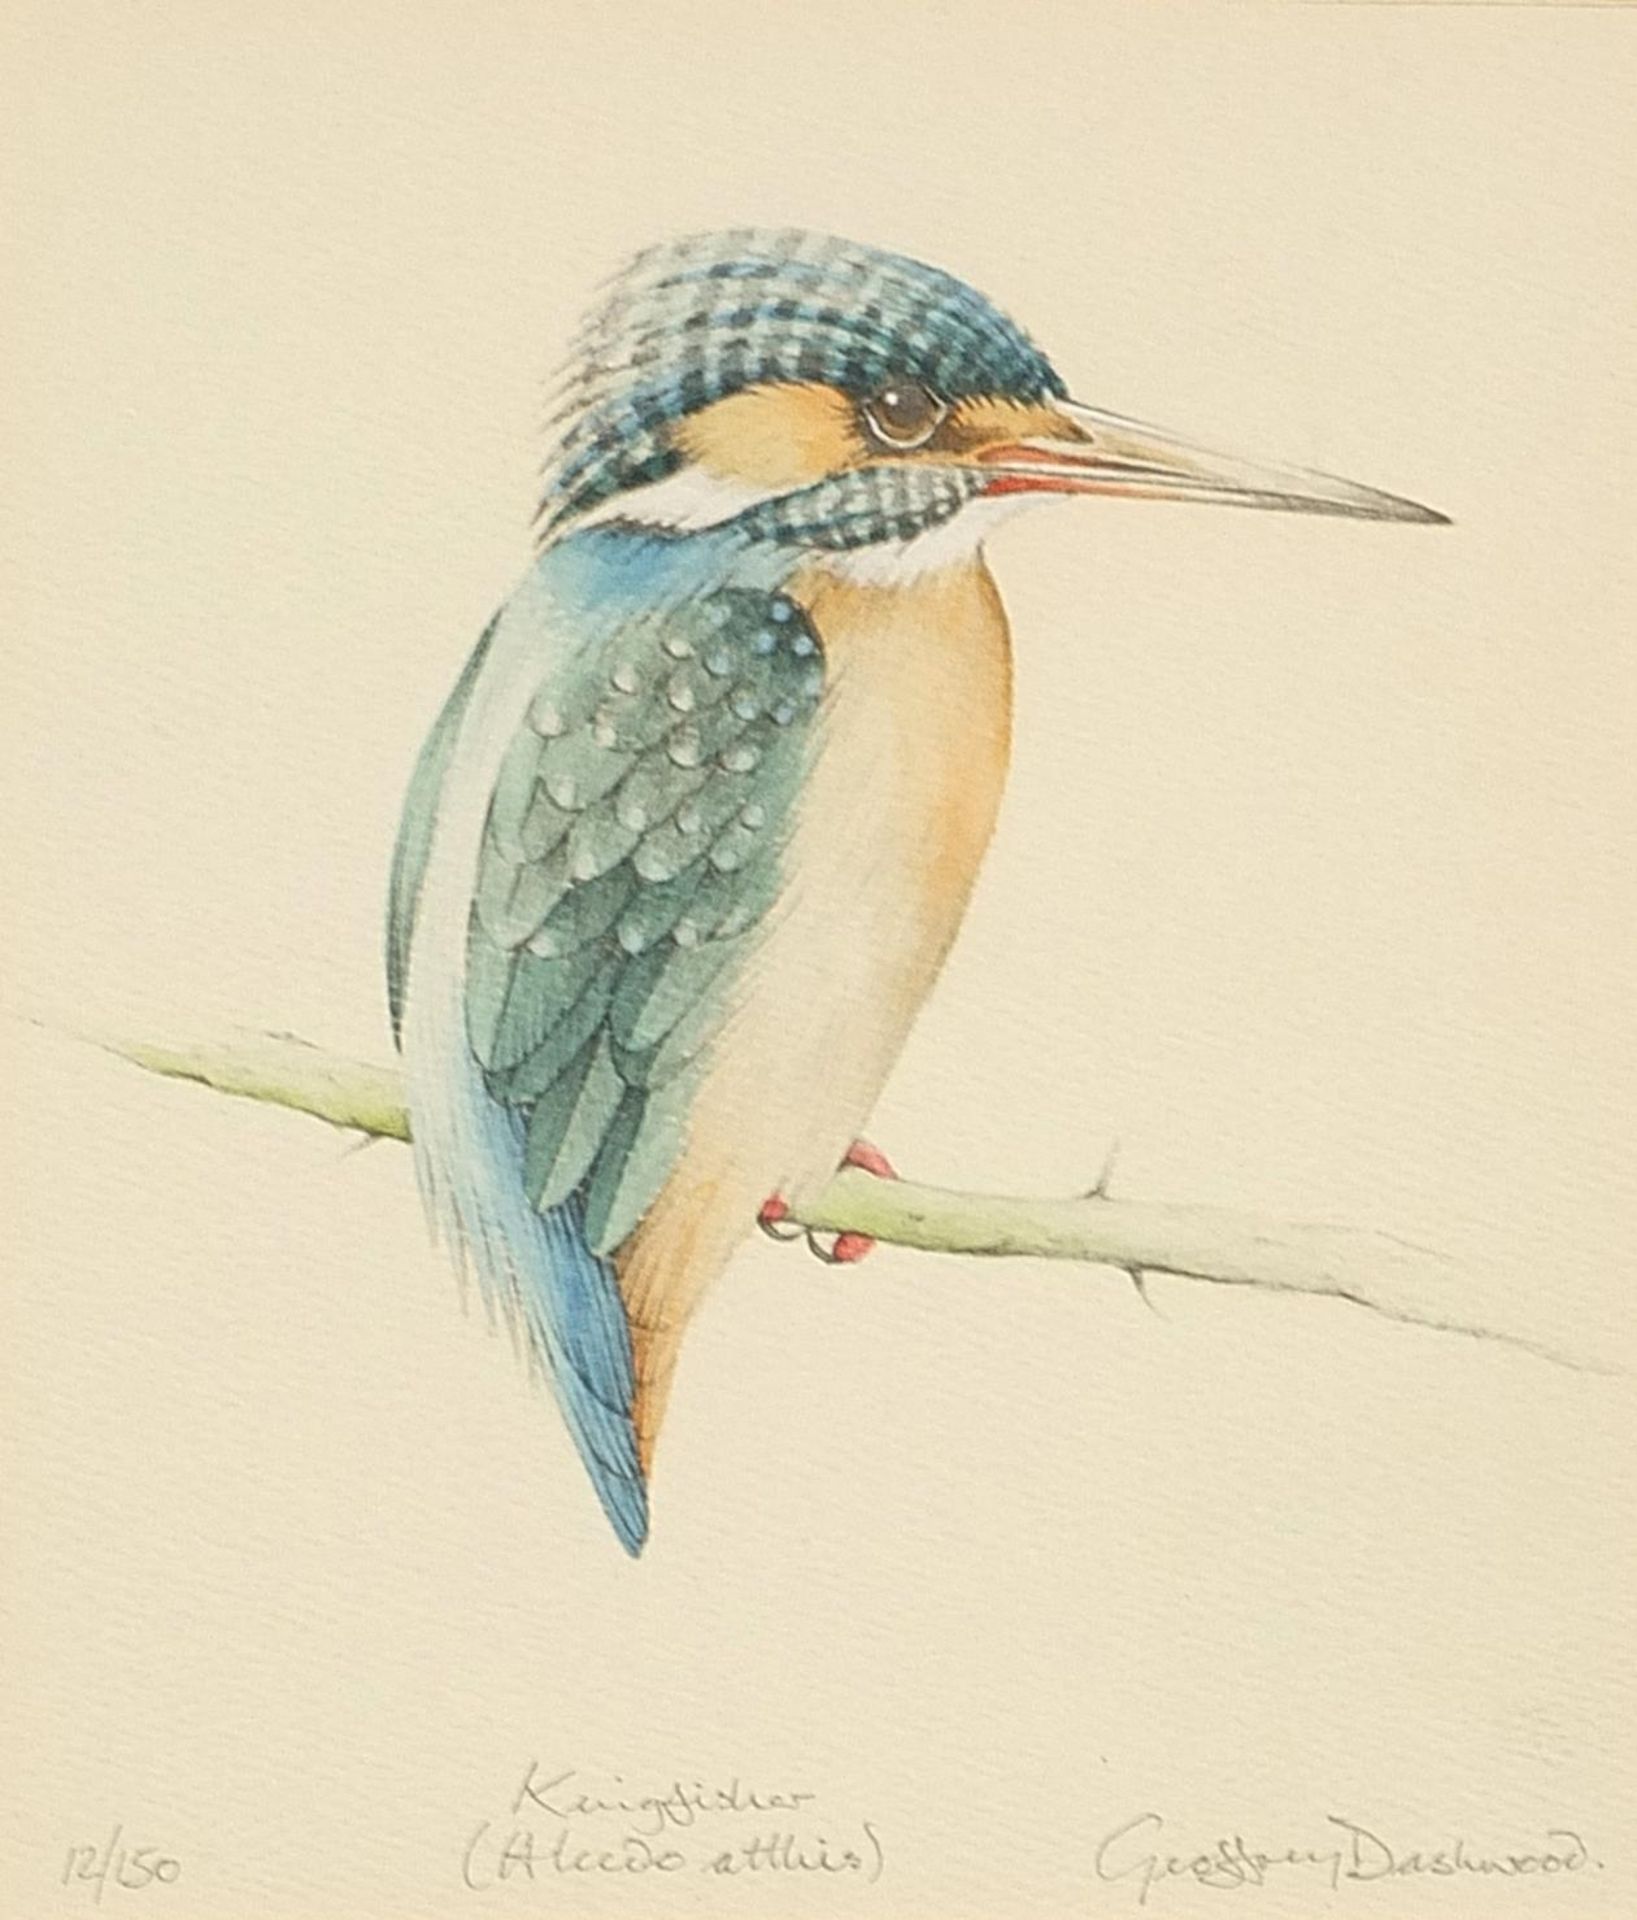 Geoffrey Dashwood - Kingfisher, pencil signed print in colour, limited edition 12/150, mounted, - Image 2 of 6